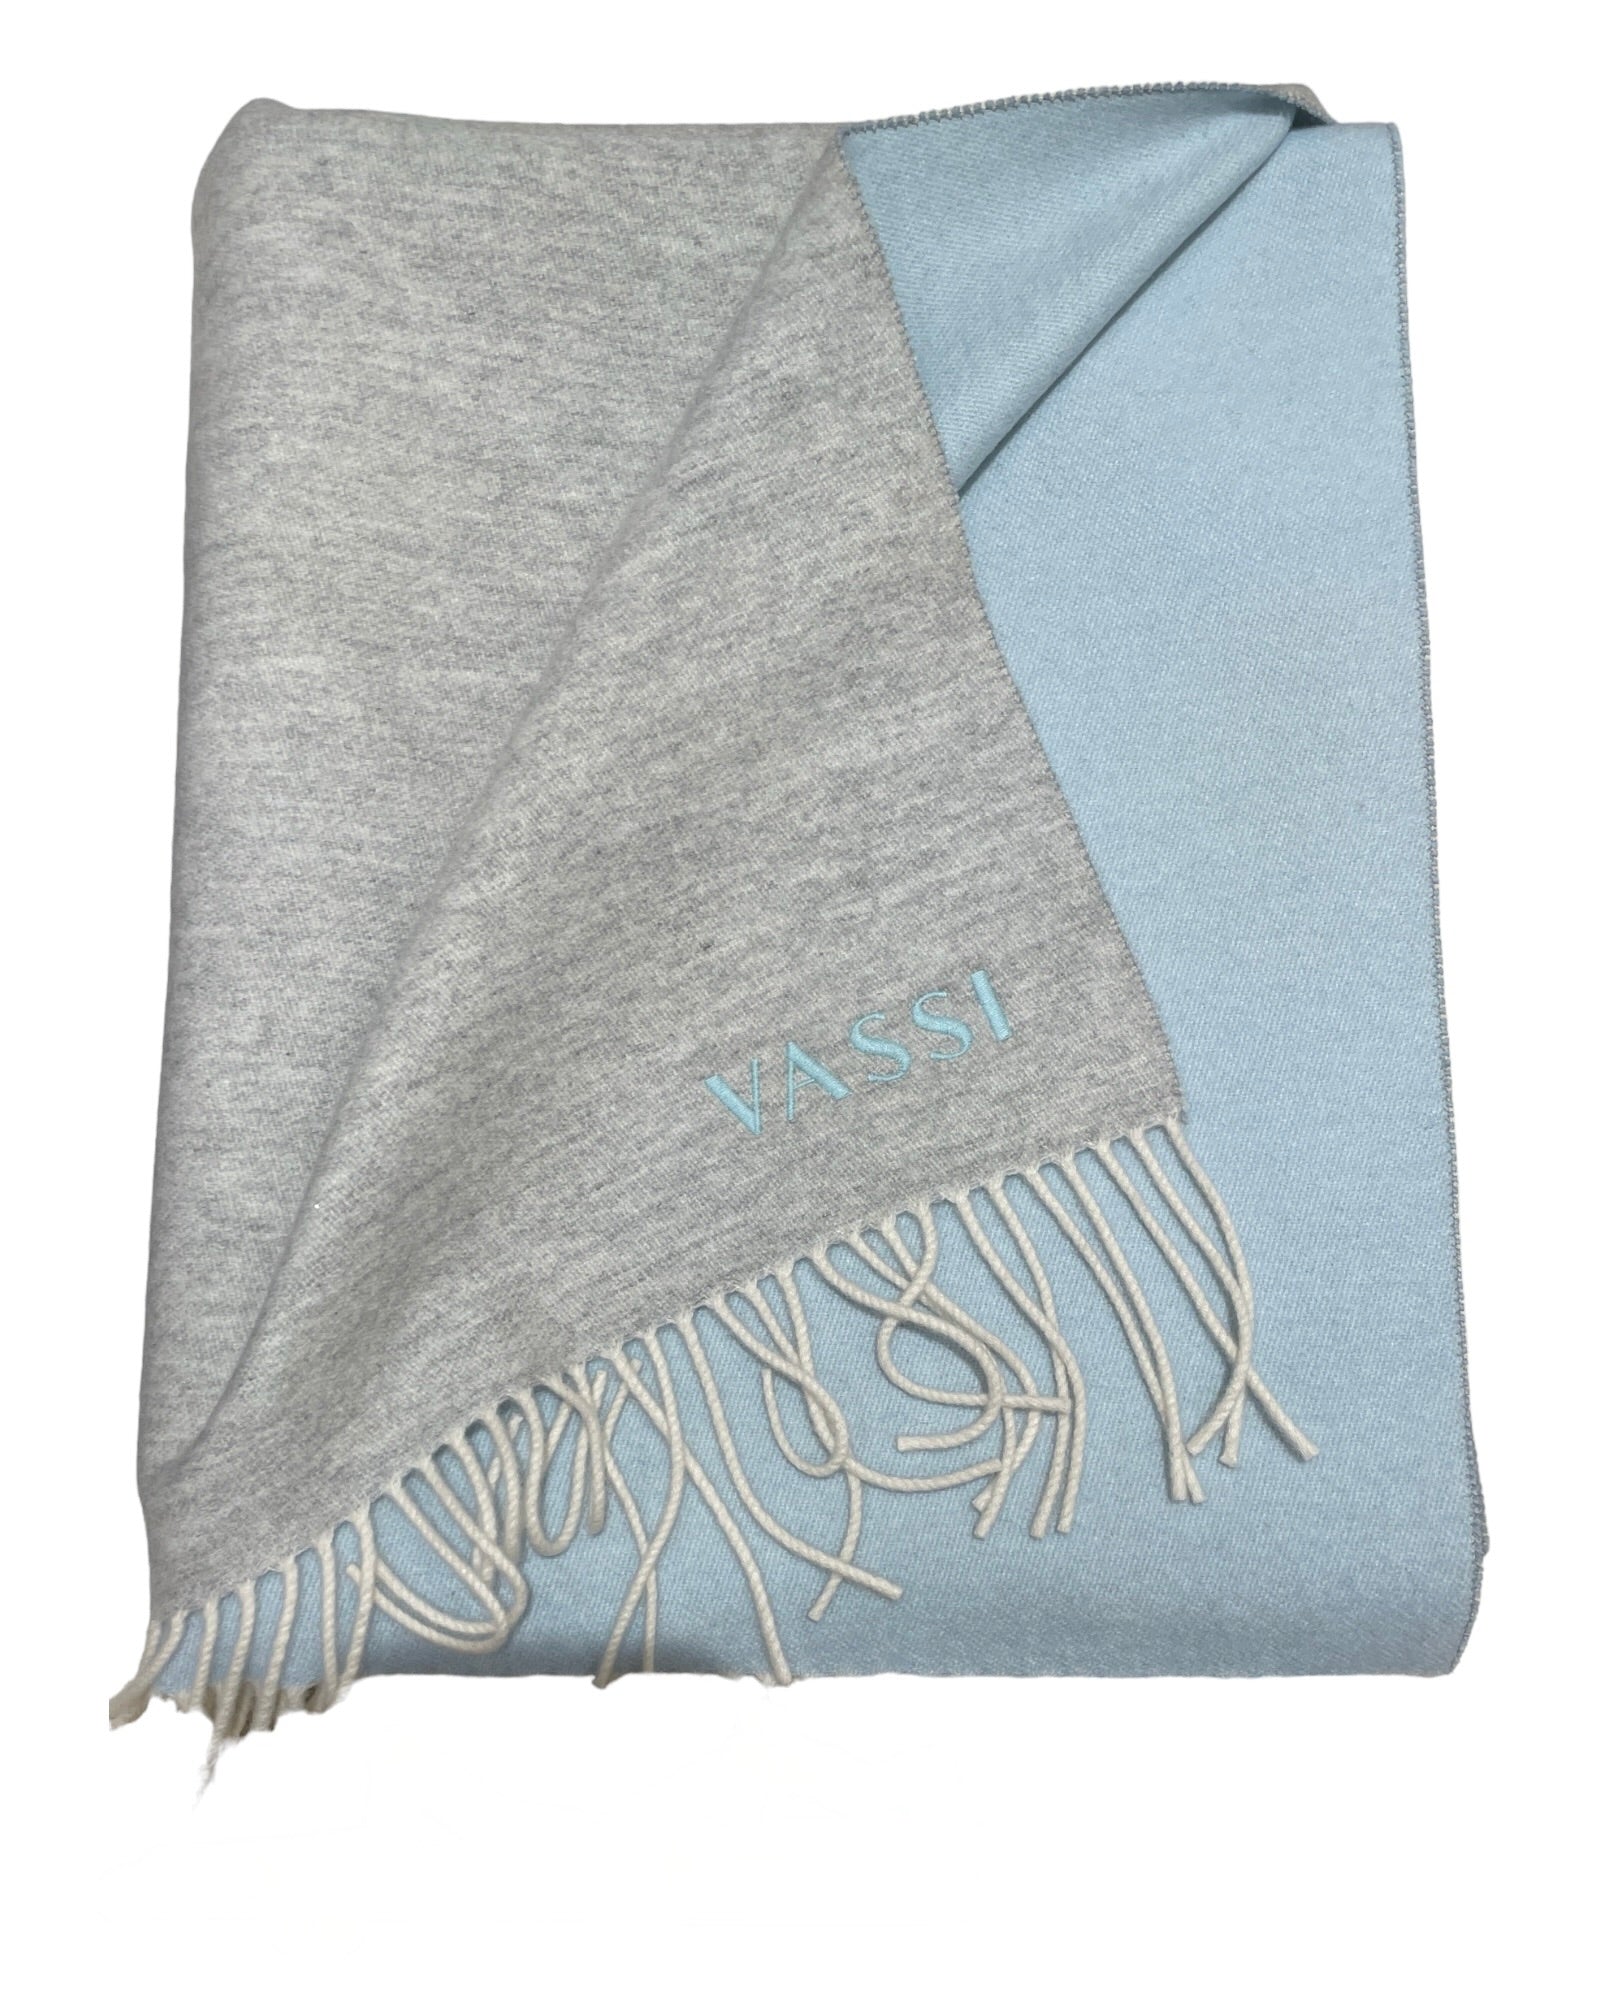 Reversible Cashmere Throw- Heather Grey, Baby Blue